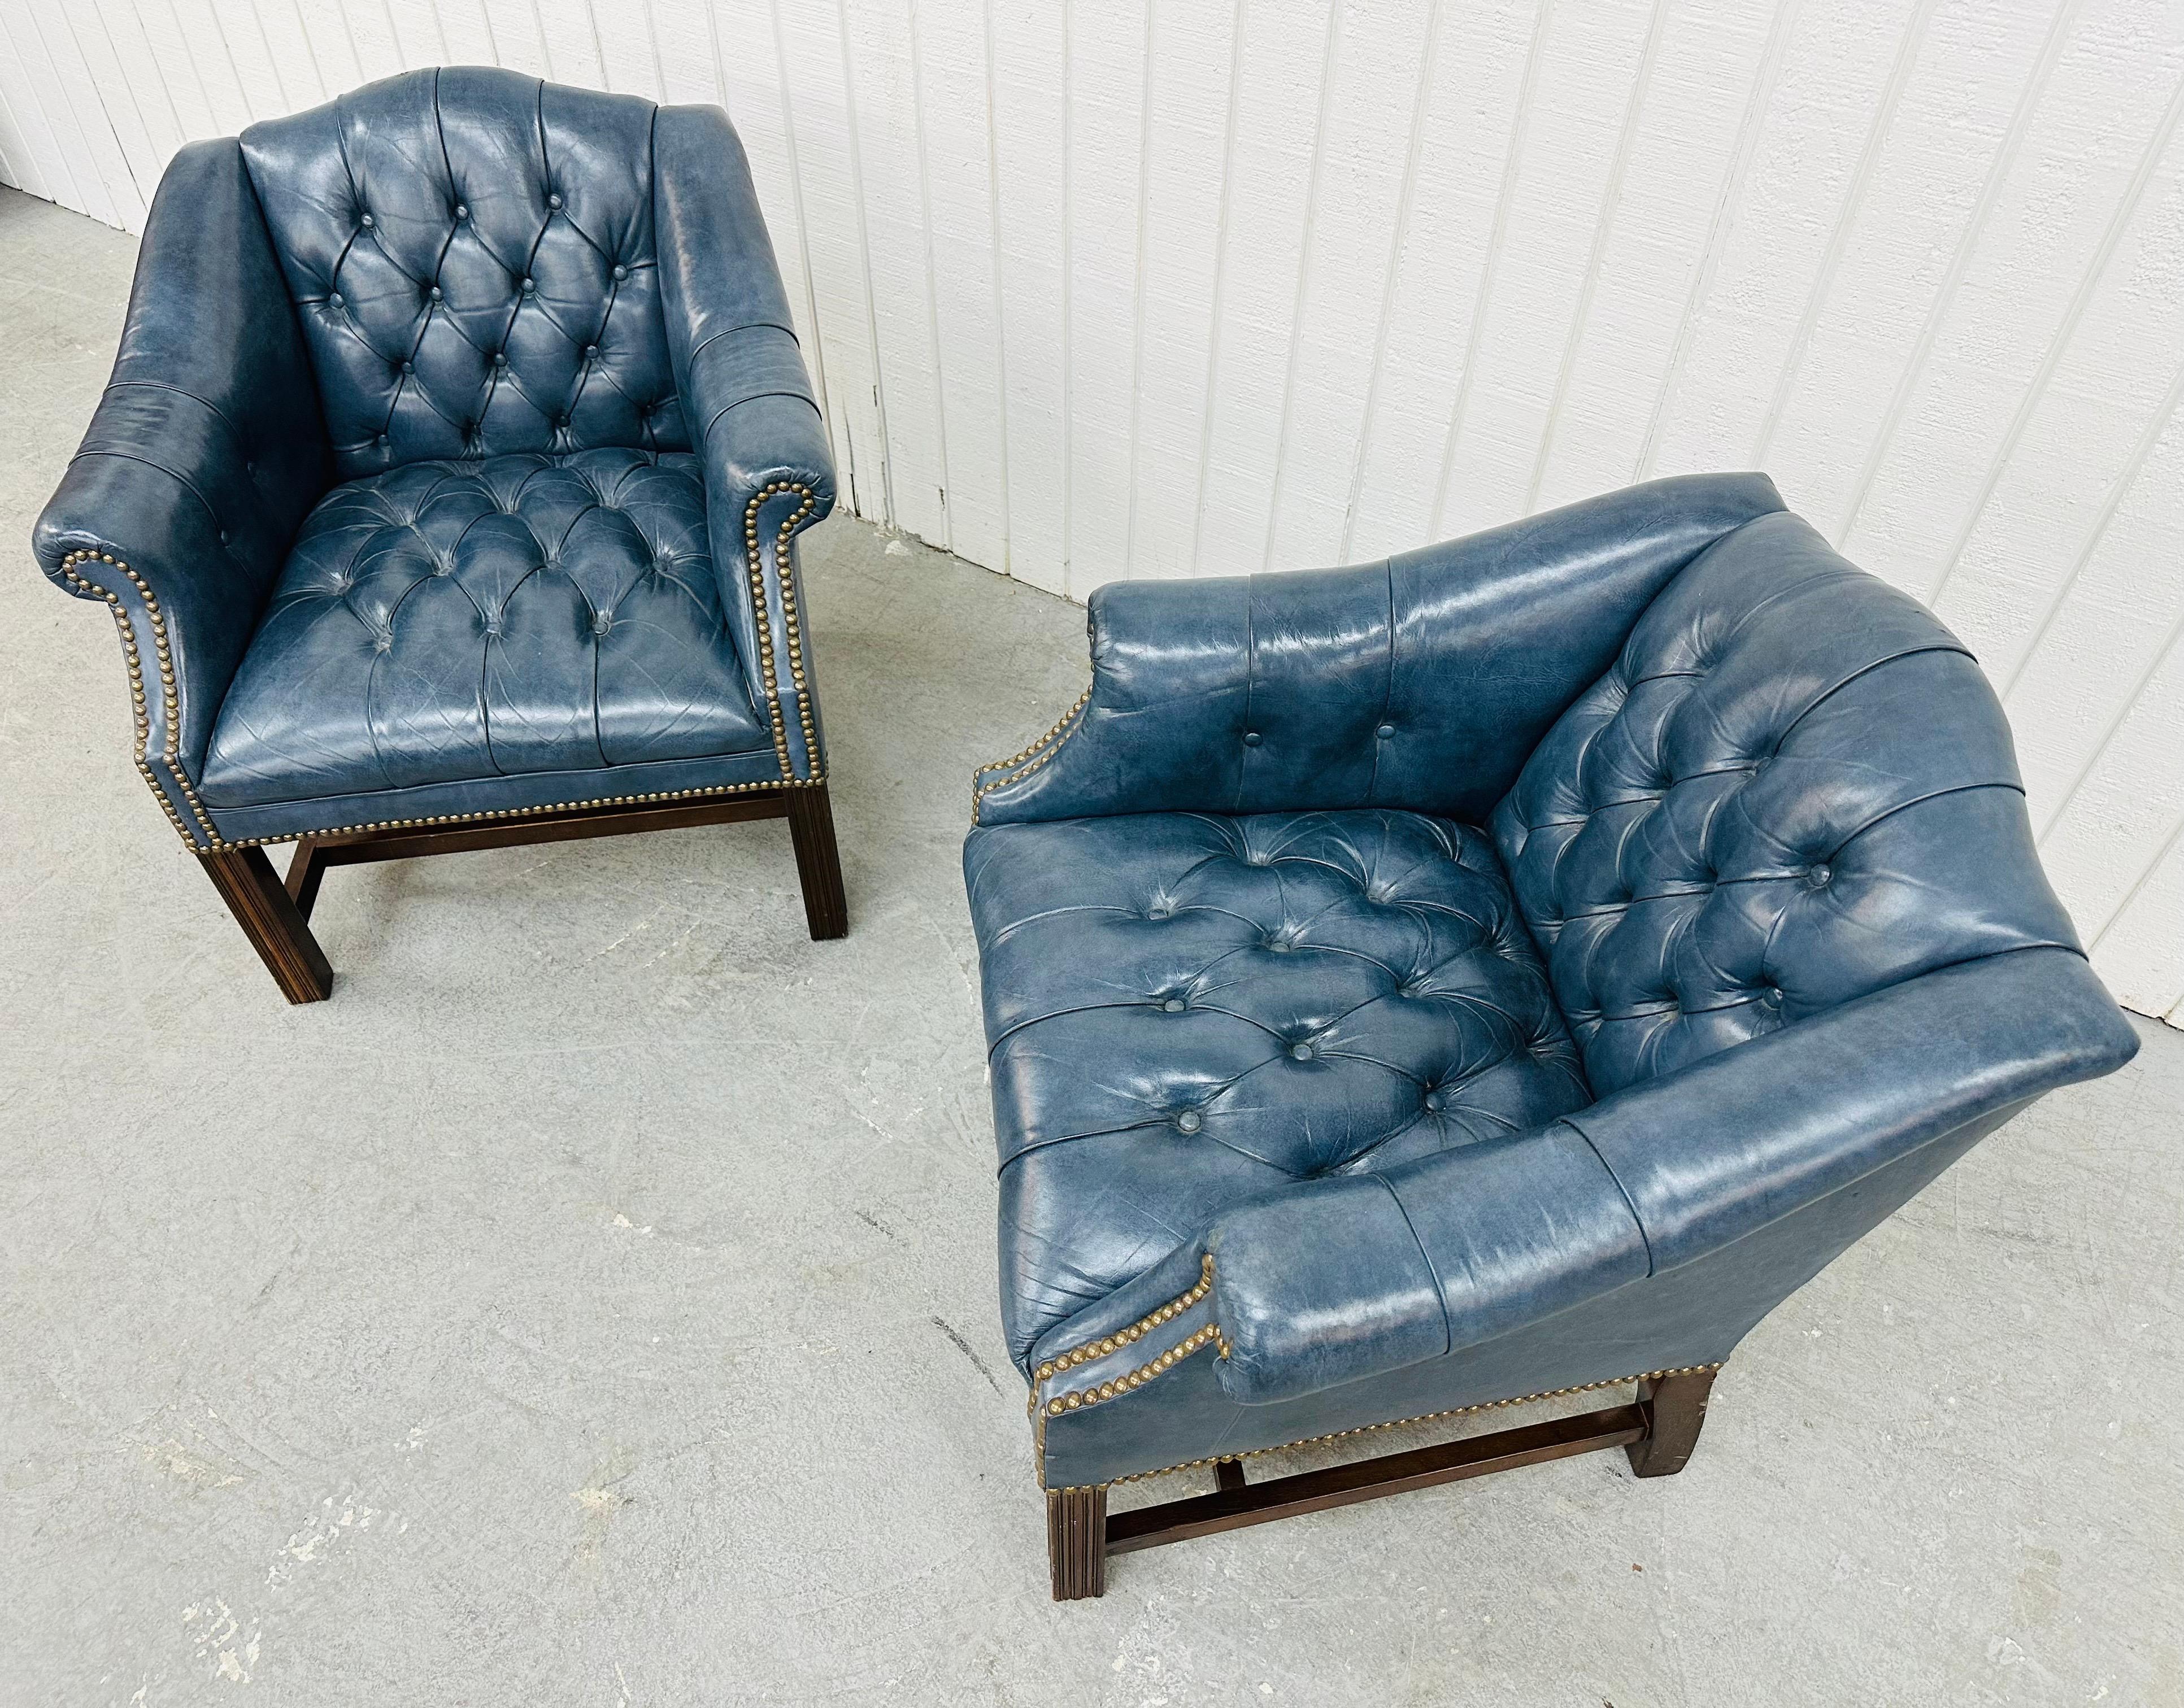 20th Century Vintage Blue Chesterfield Arm Chairs - Set of 2